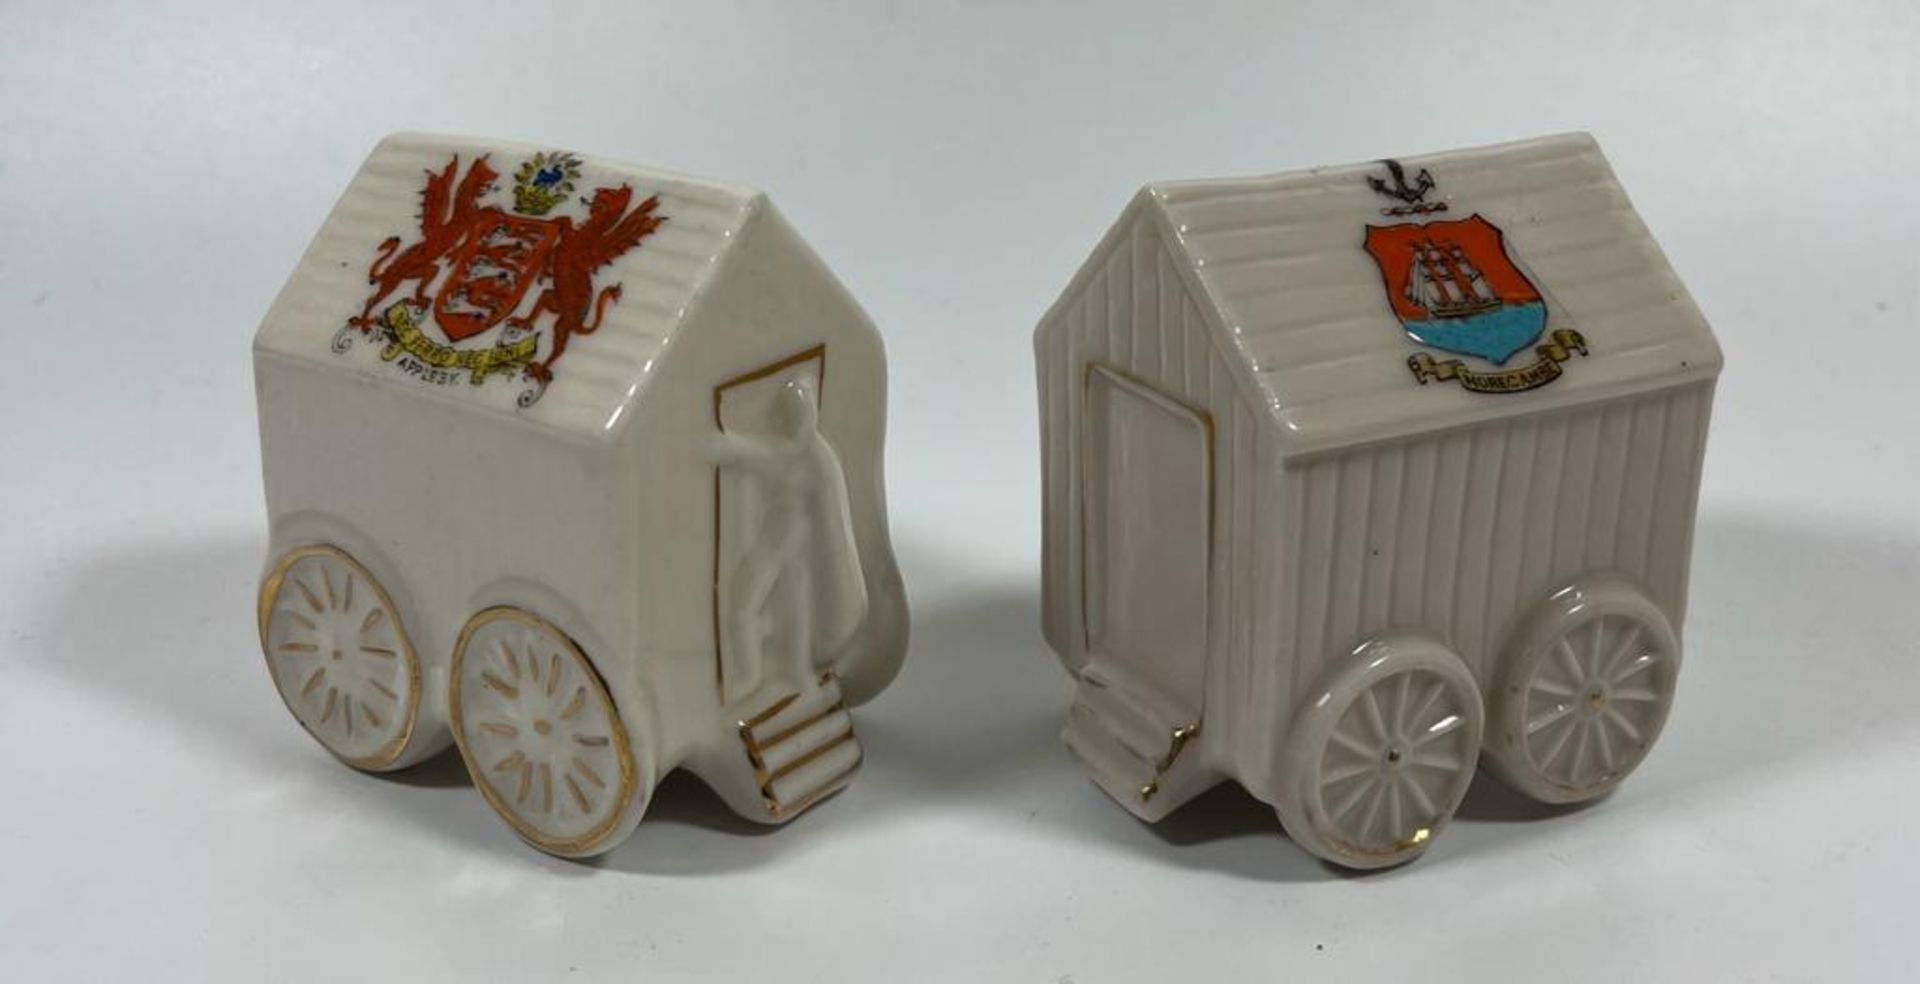 A PAIR OF VINTAGE CRESTED WARE CHINA BATHING HUTS, FLORENTINE & CORONA - MORECAMBE AND APPLESY